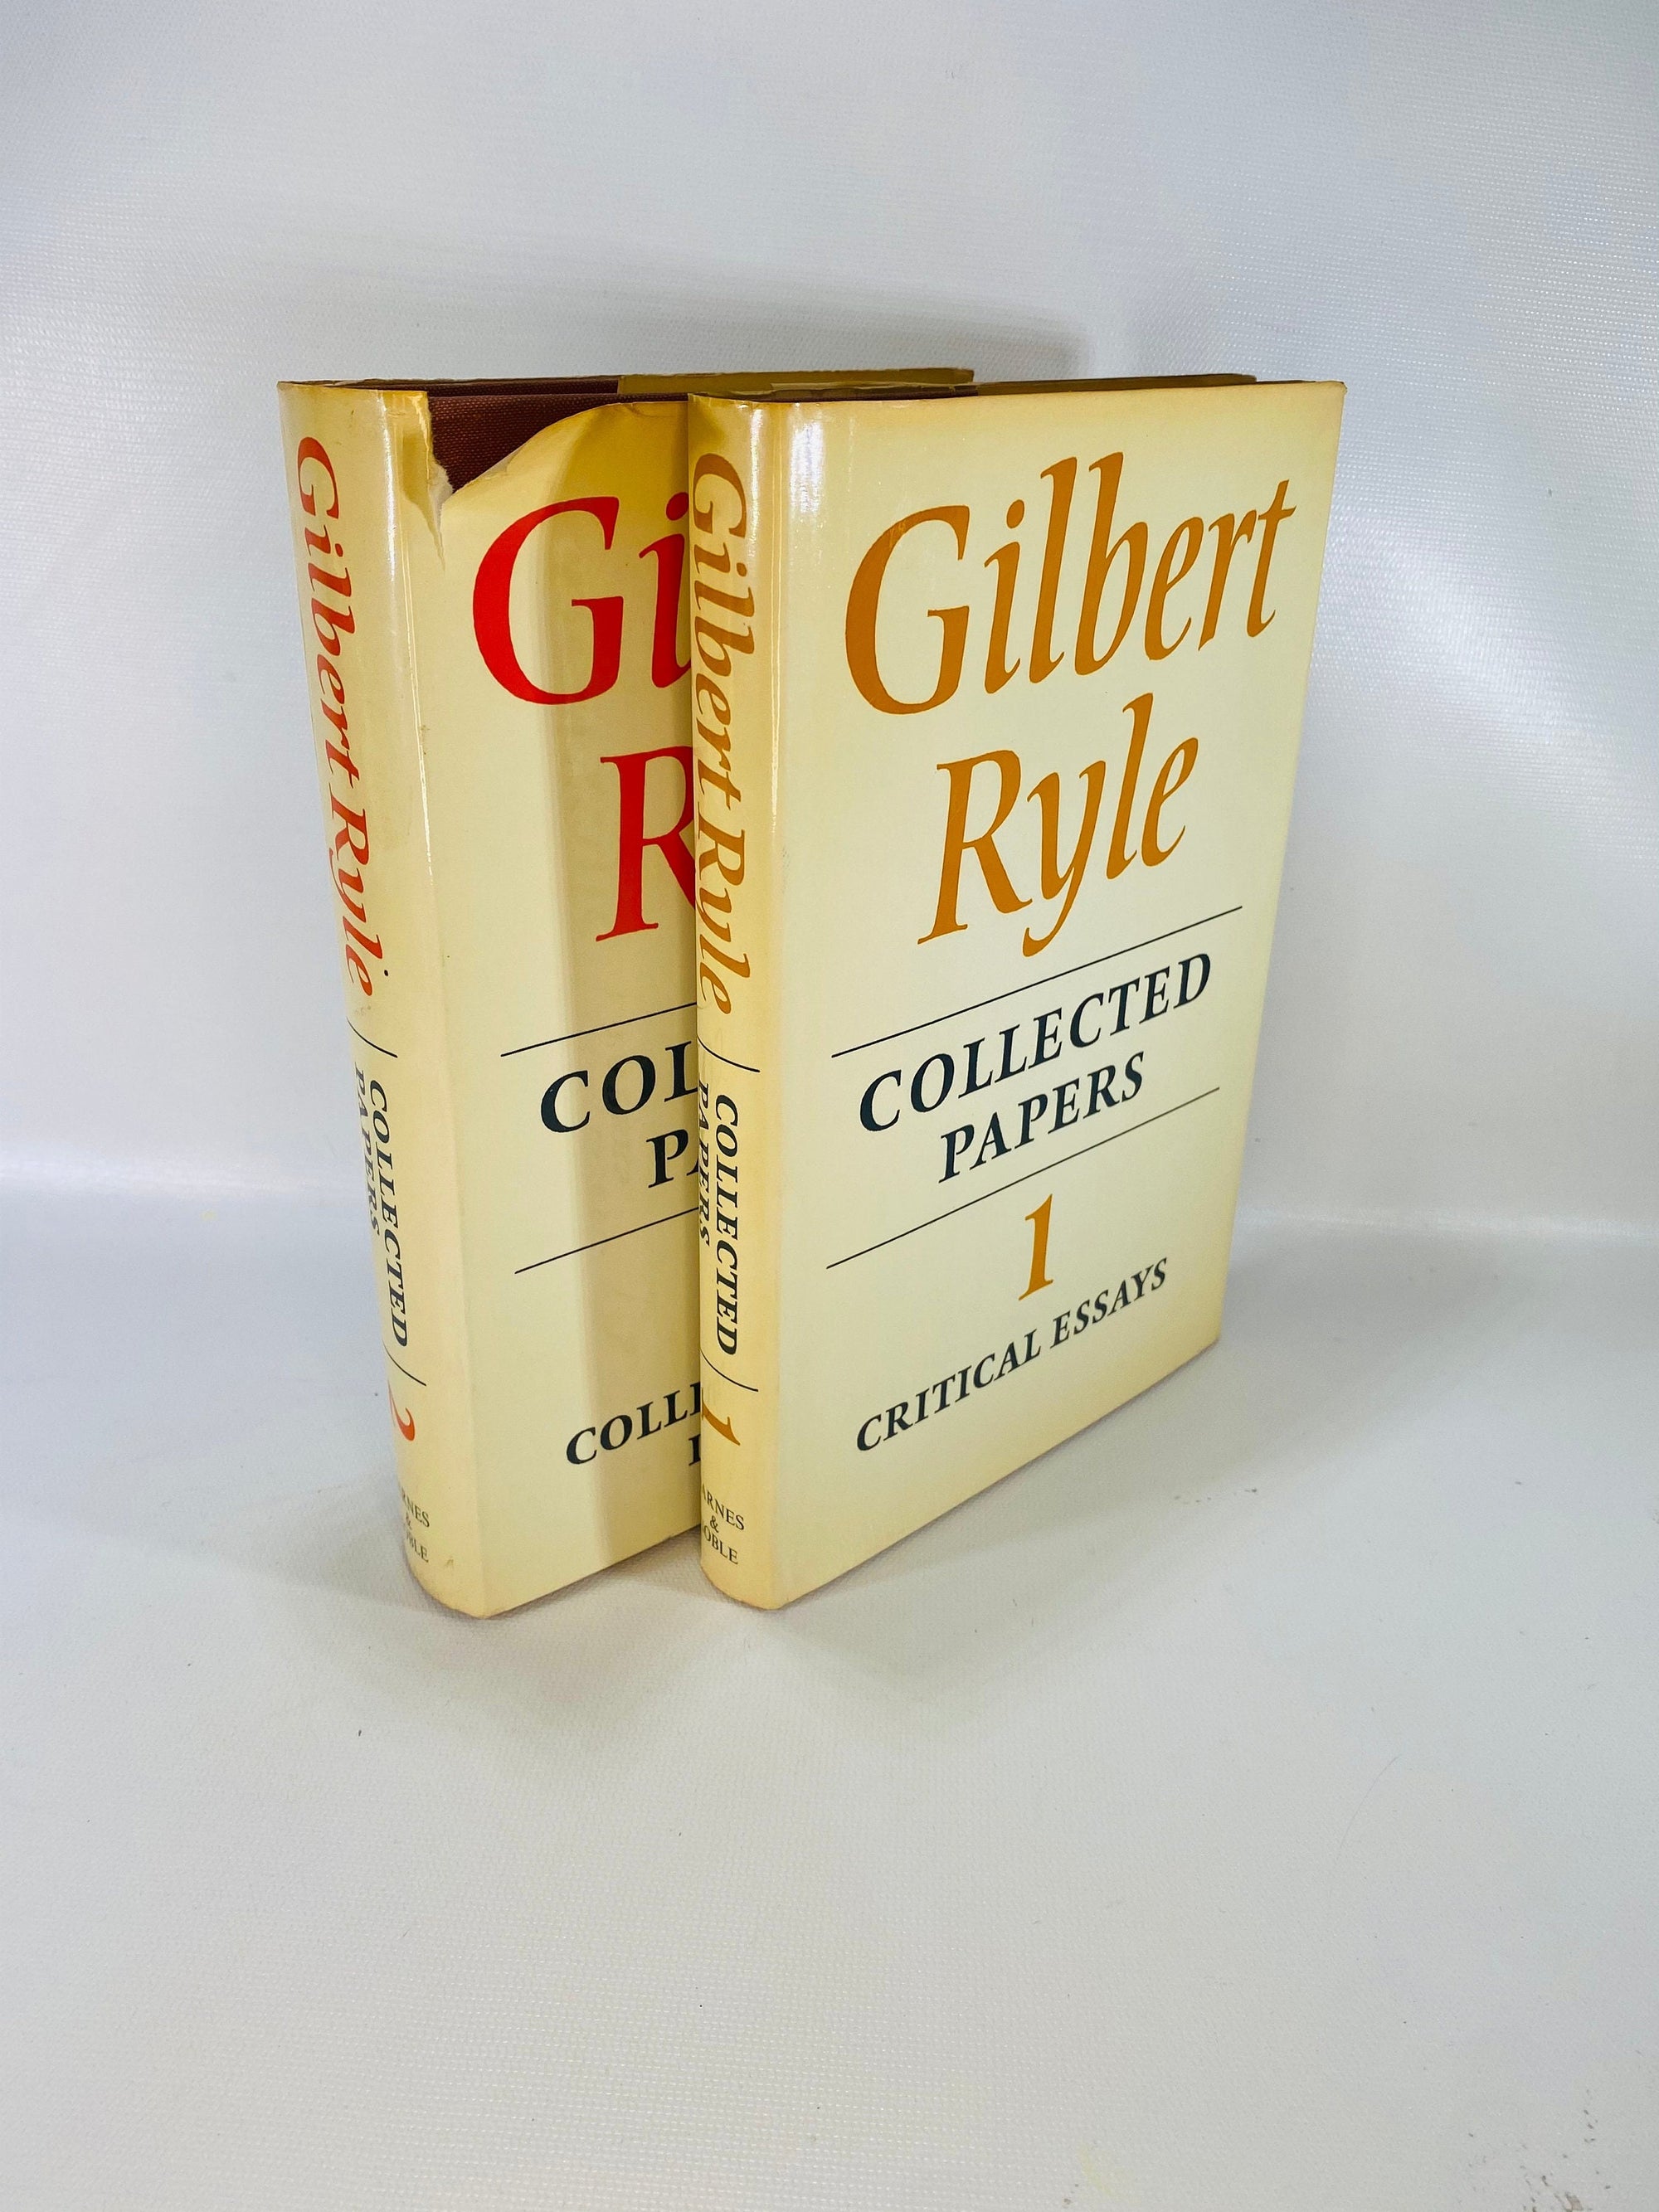 Gilbert Ryle Collected Papers Volume One: Critical essays and Volume Two Collected Essays 1971 Barnes & Noble Vintage Book